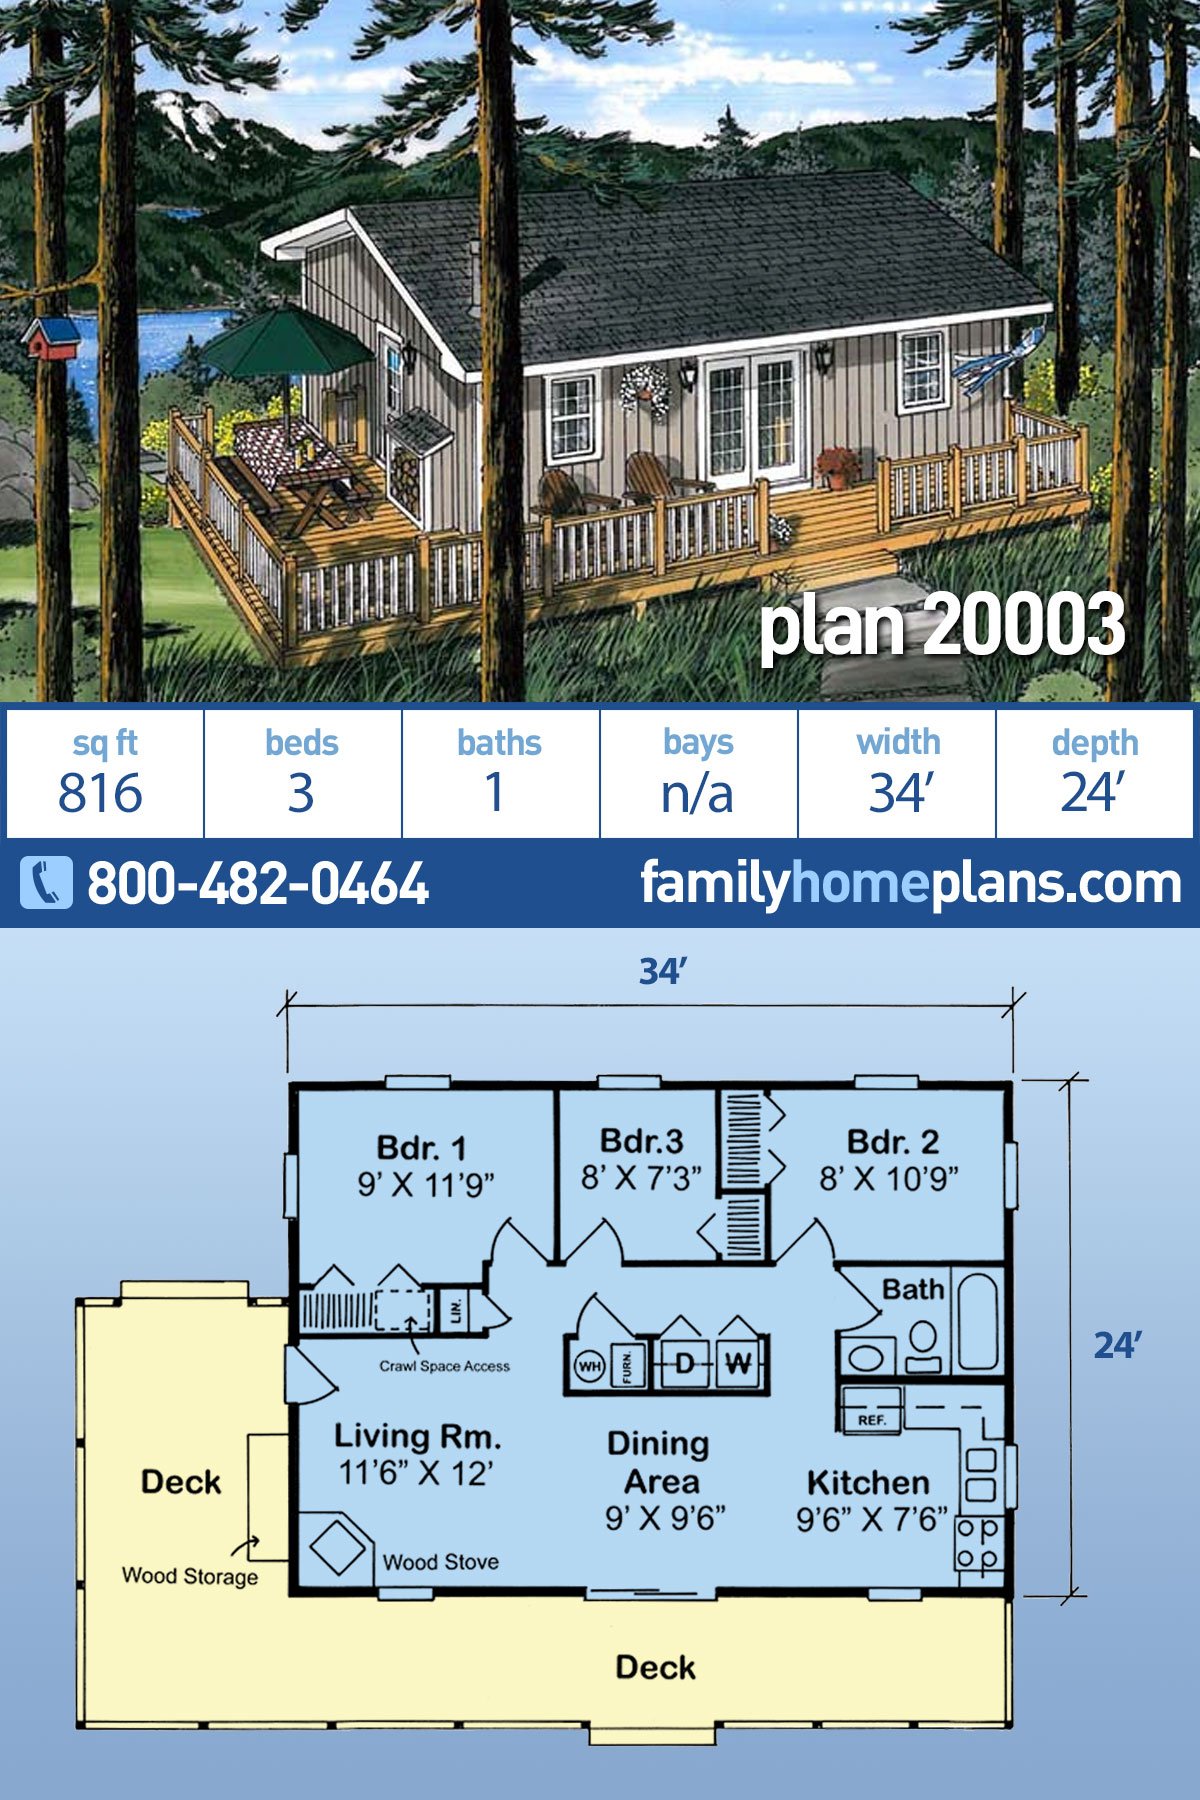 Cabin, Traditional House Plan 20003 with 3 Beds, 1 Baths